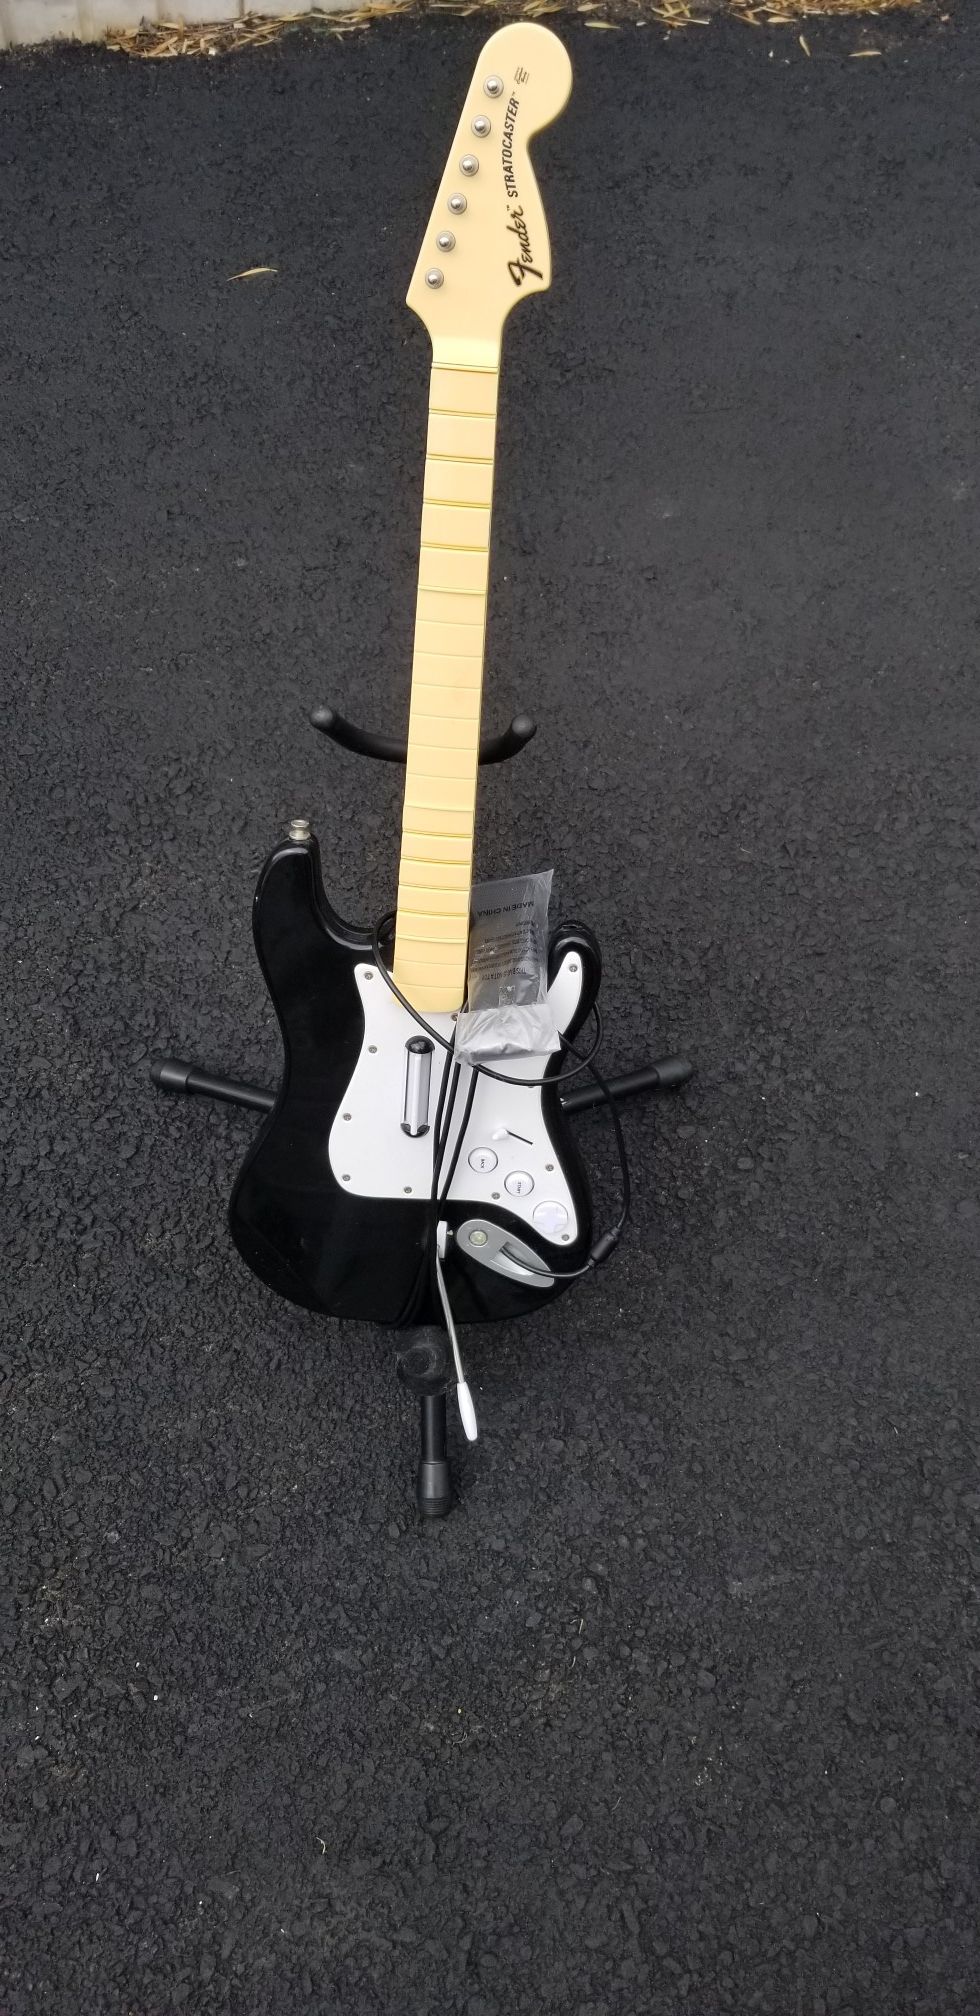 ROCK BAND GAME Fender guitar with stand